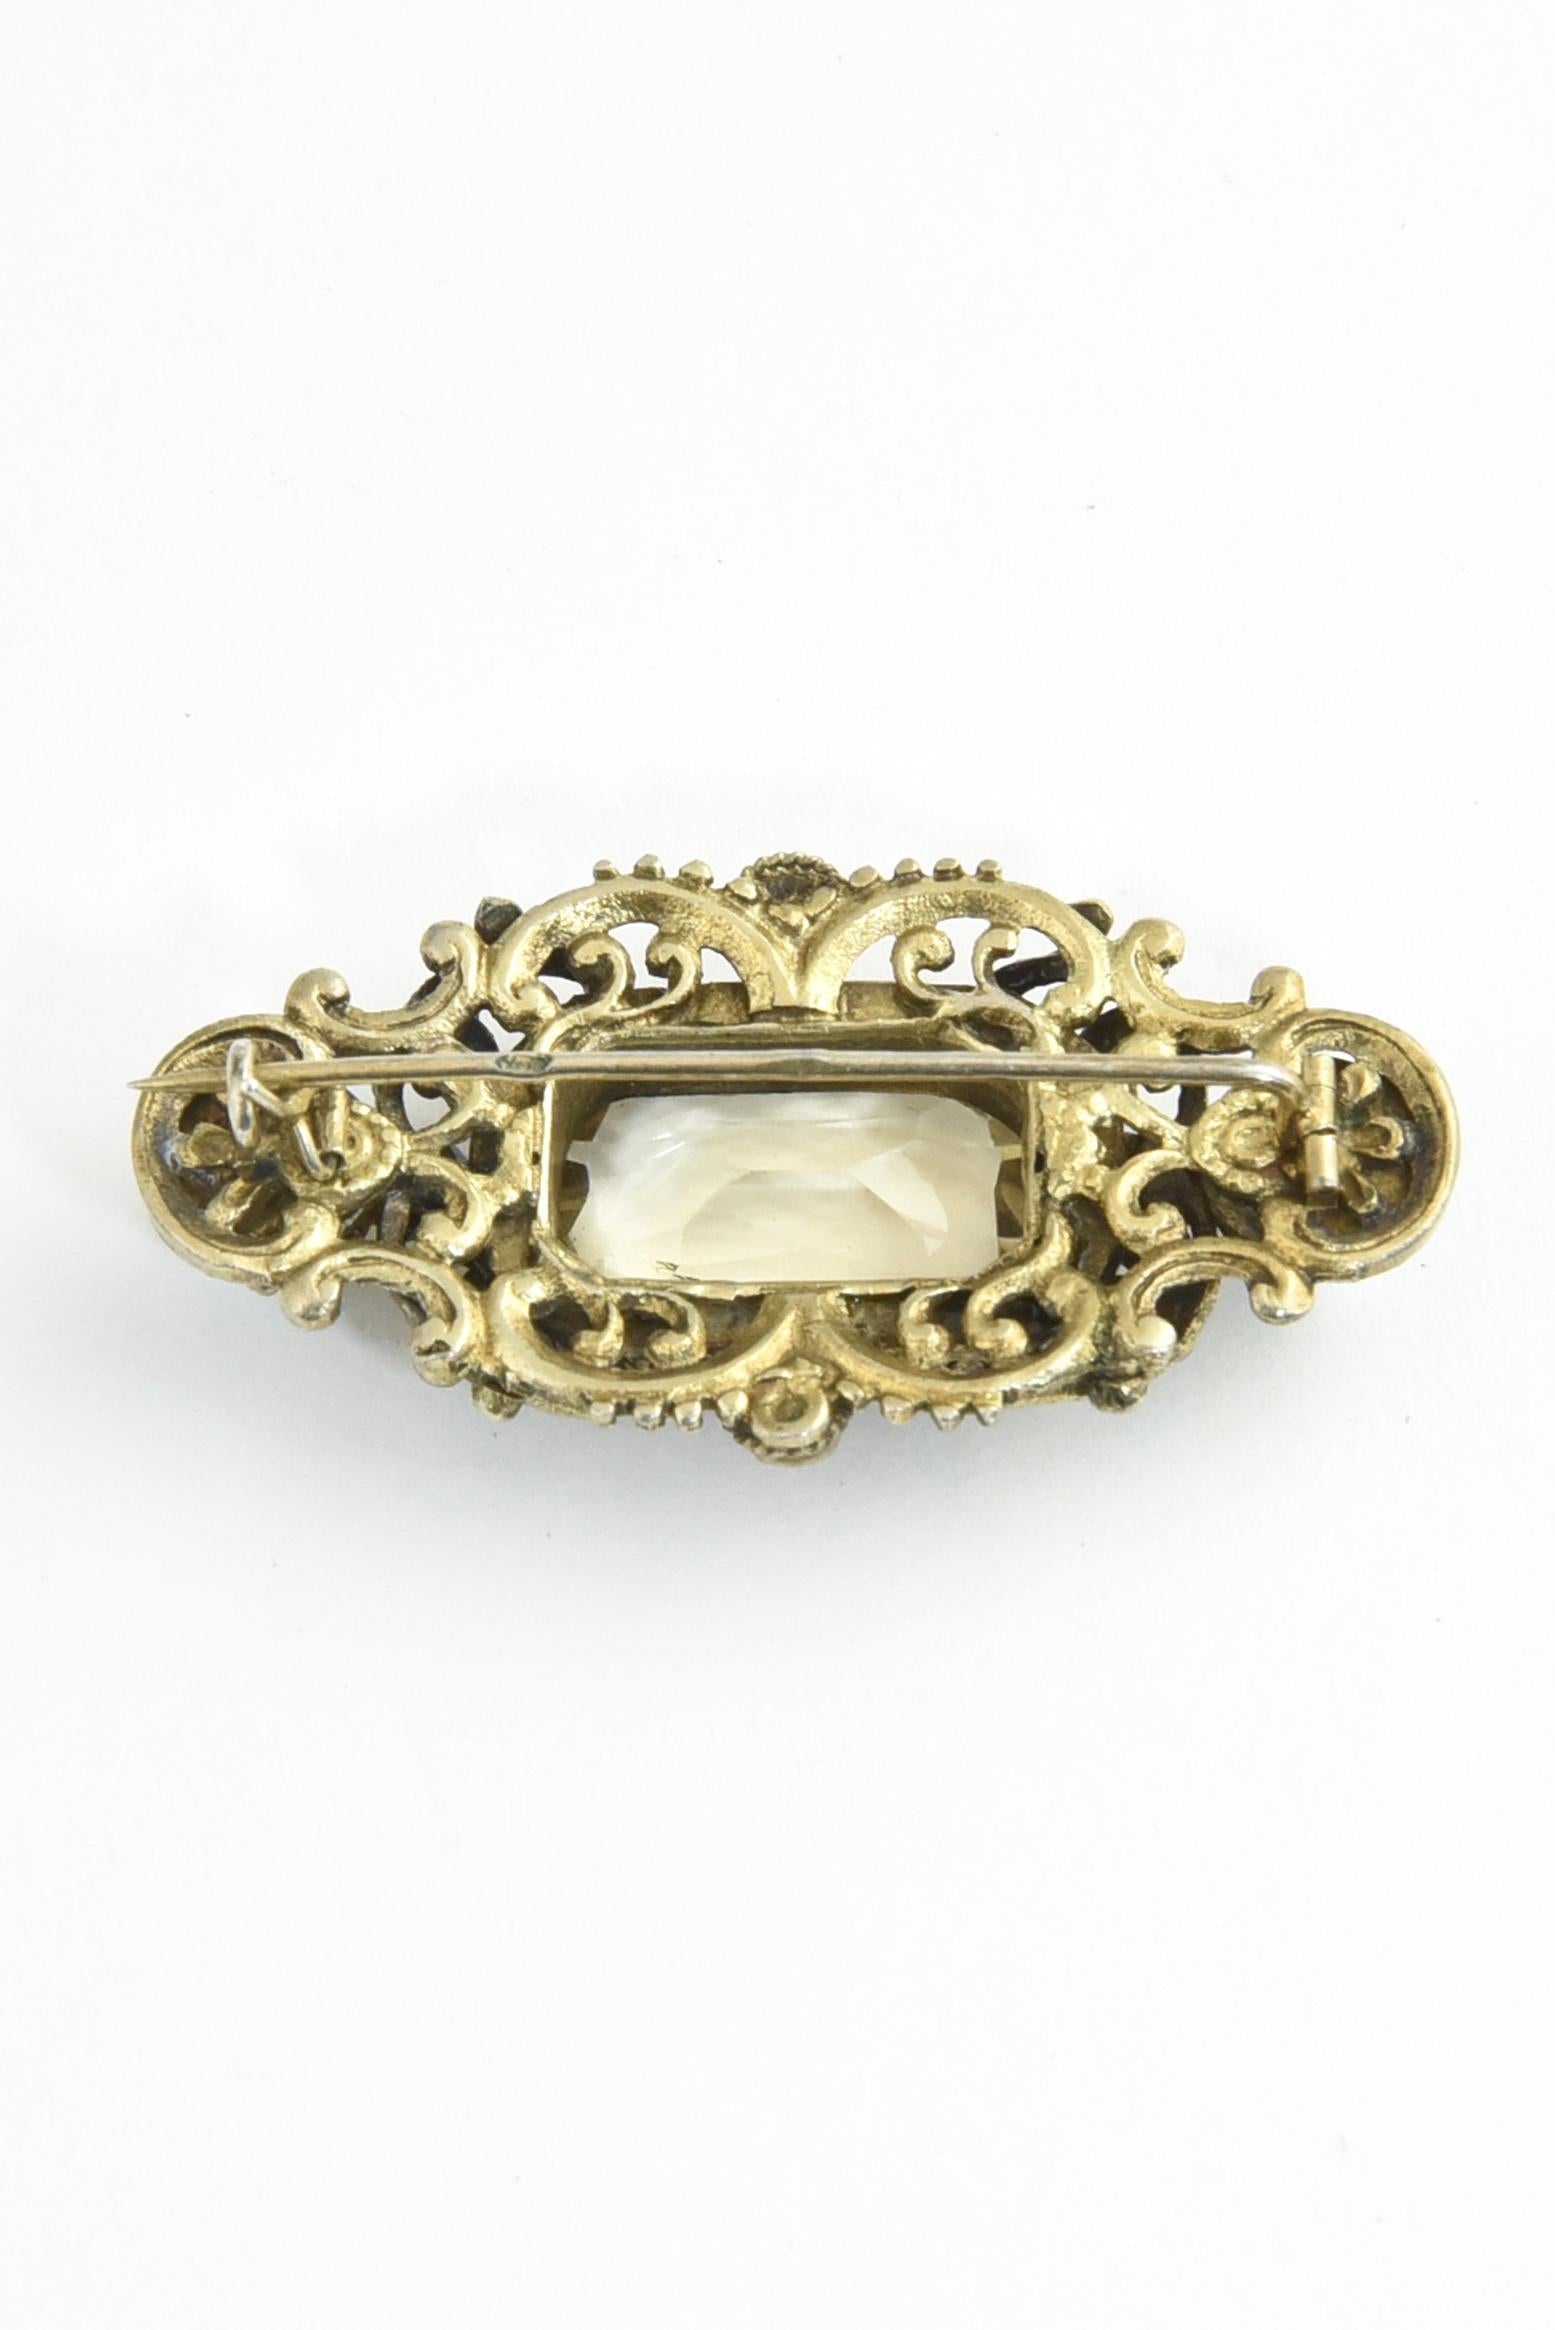 Round Cut Antique Austro-Hungarian Floral Gilt Silver Citrine Brooch For Sale